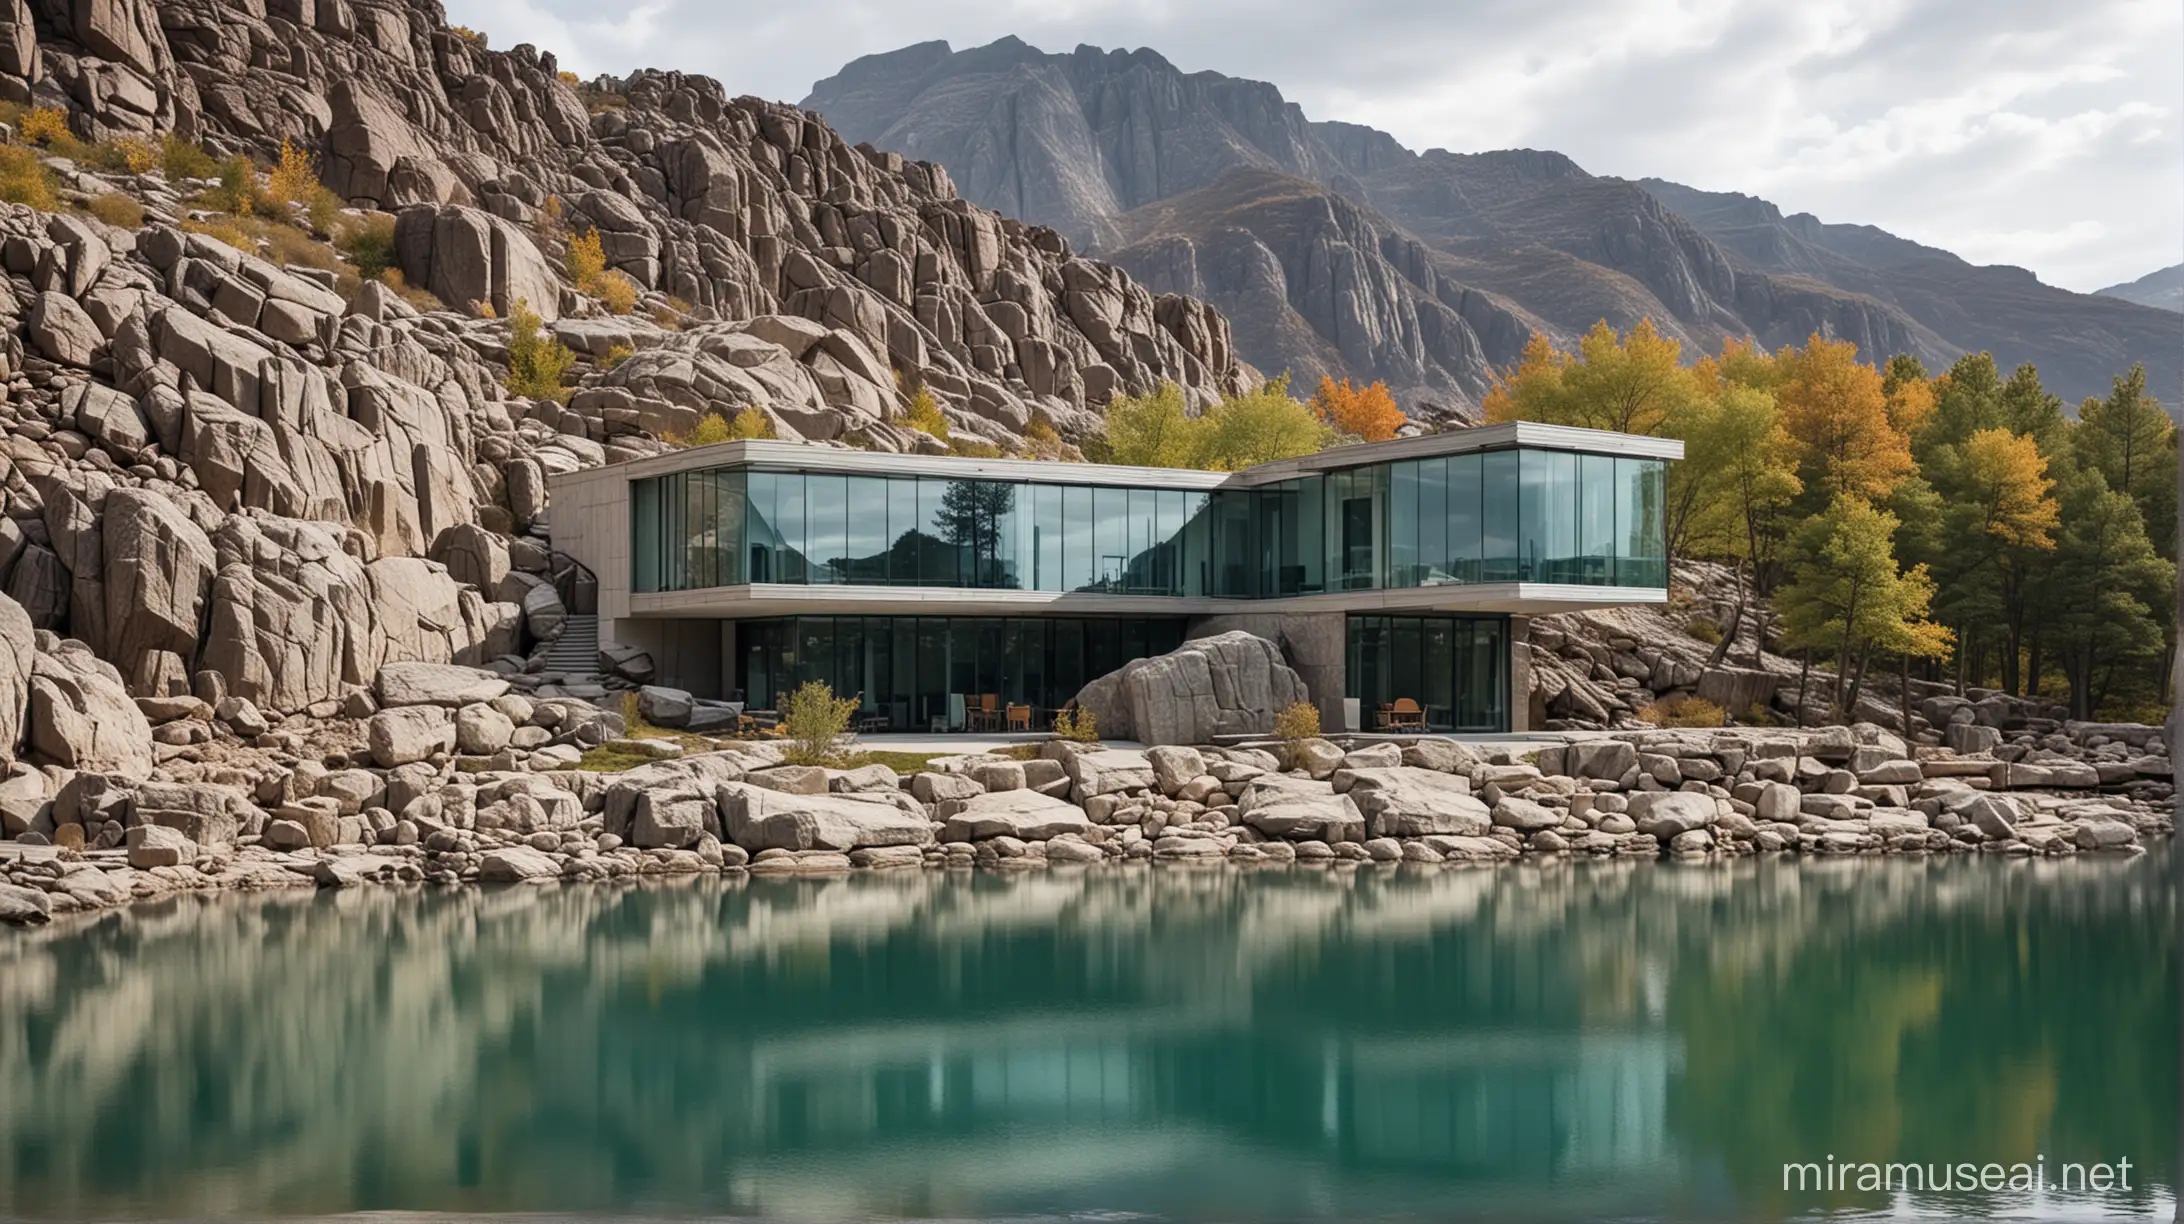 Modern building in a rocky environment with a lake in the foreground